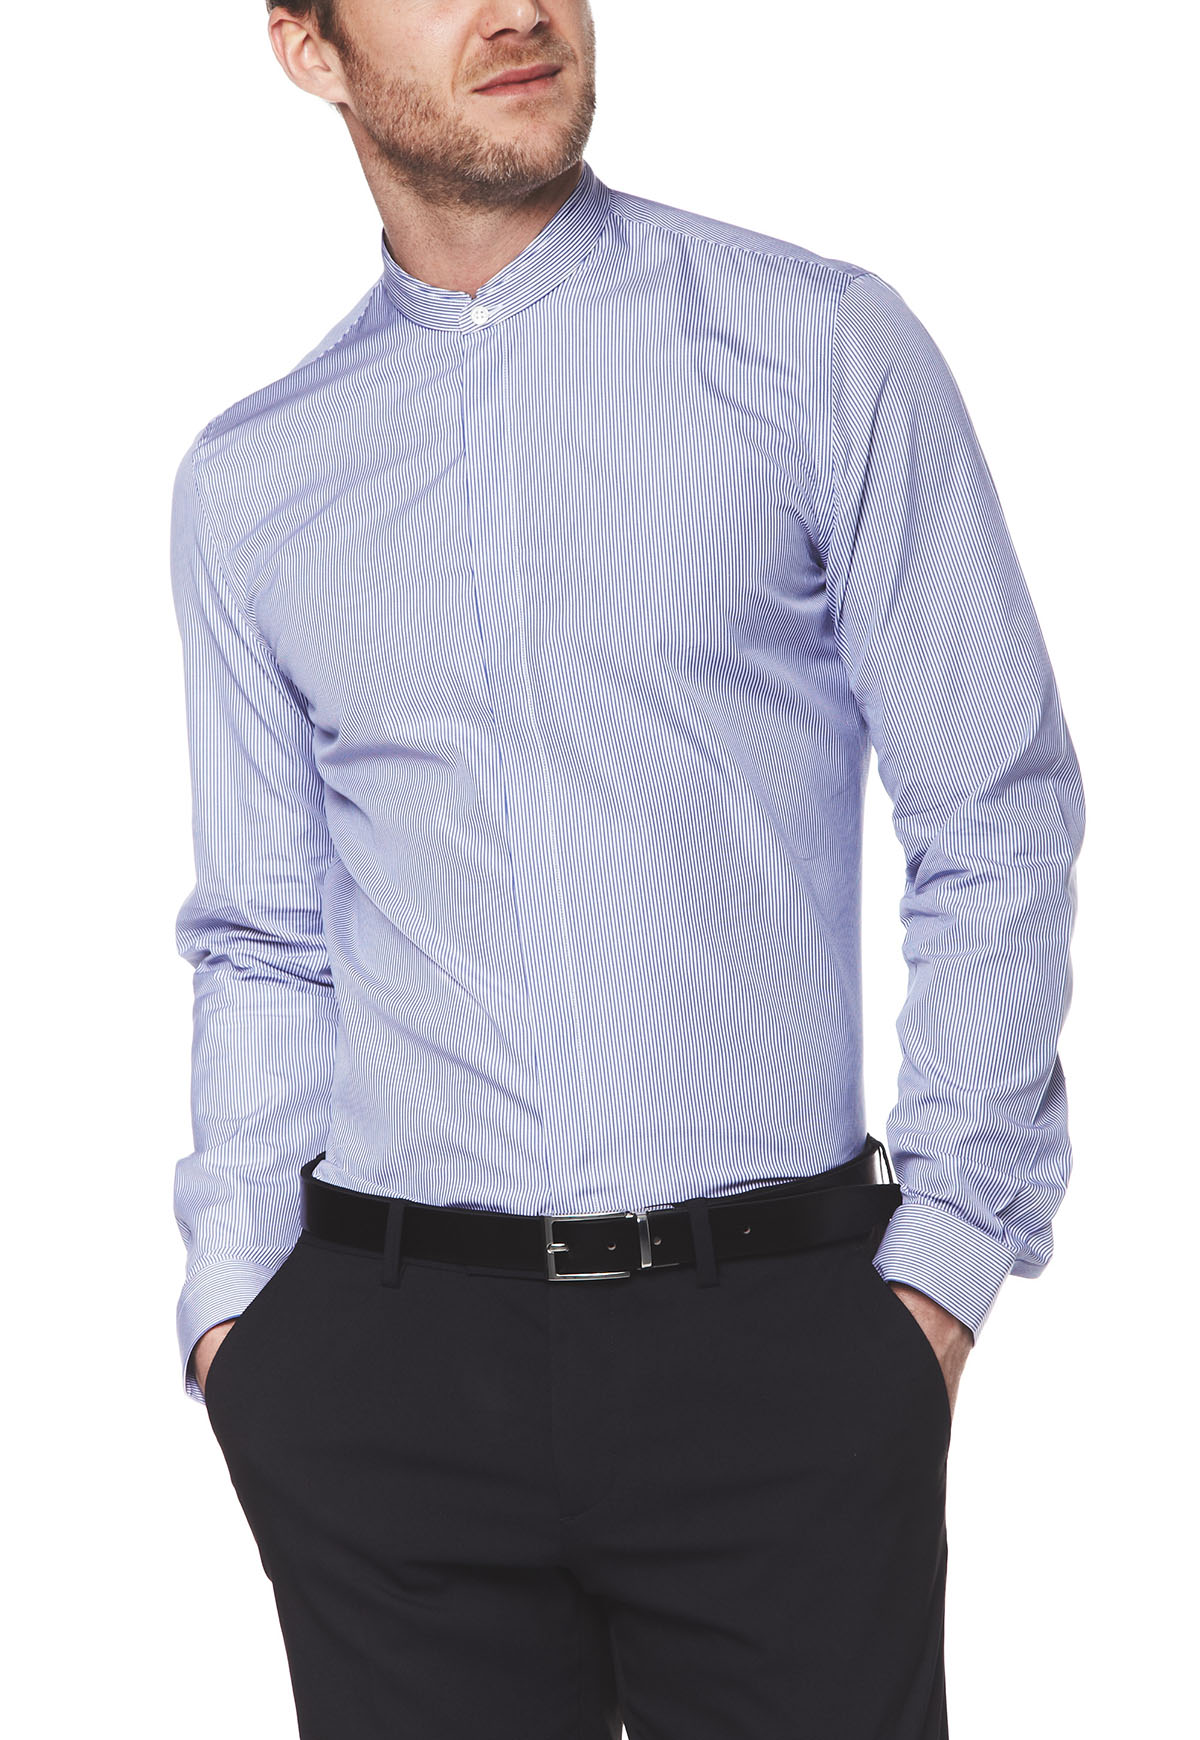 chemise-homme-manches-longues-coupe-extra-ajustee-anatole-popeline-bleu-fonce-raye-coton-face-alain-figaret-an7394606934.jpg